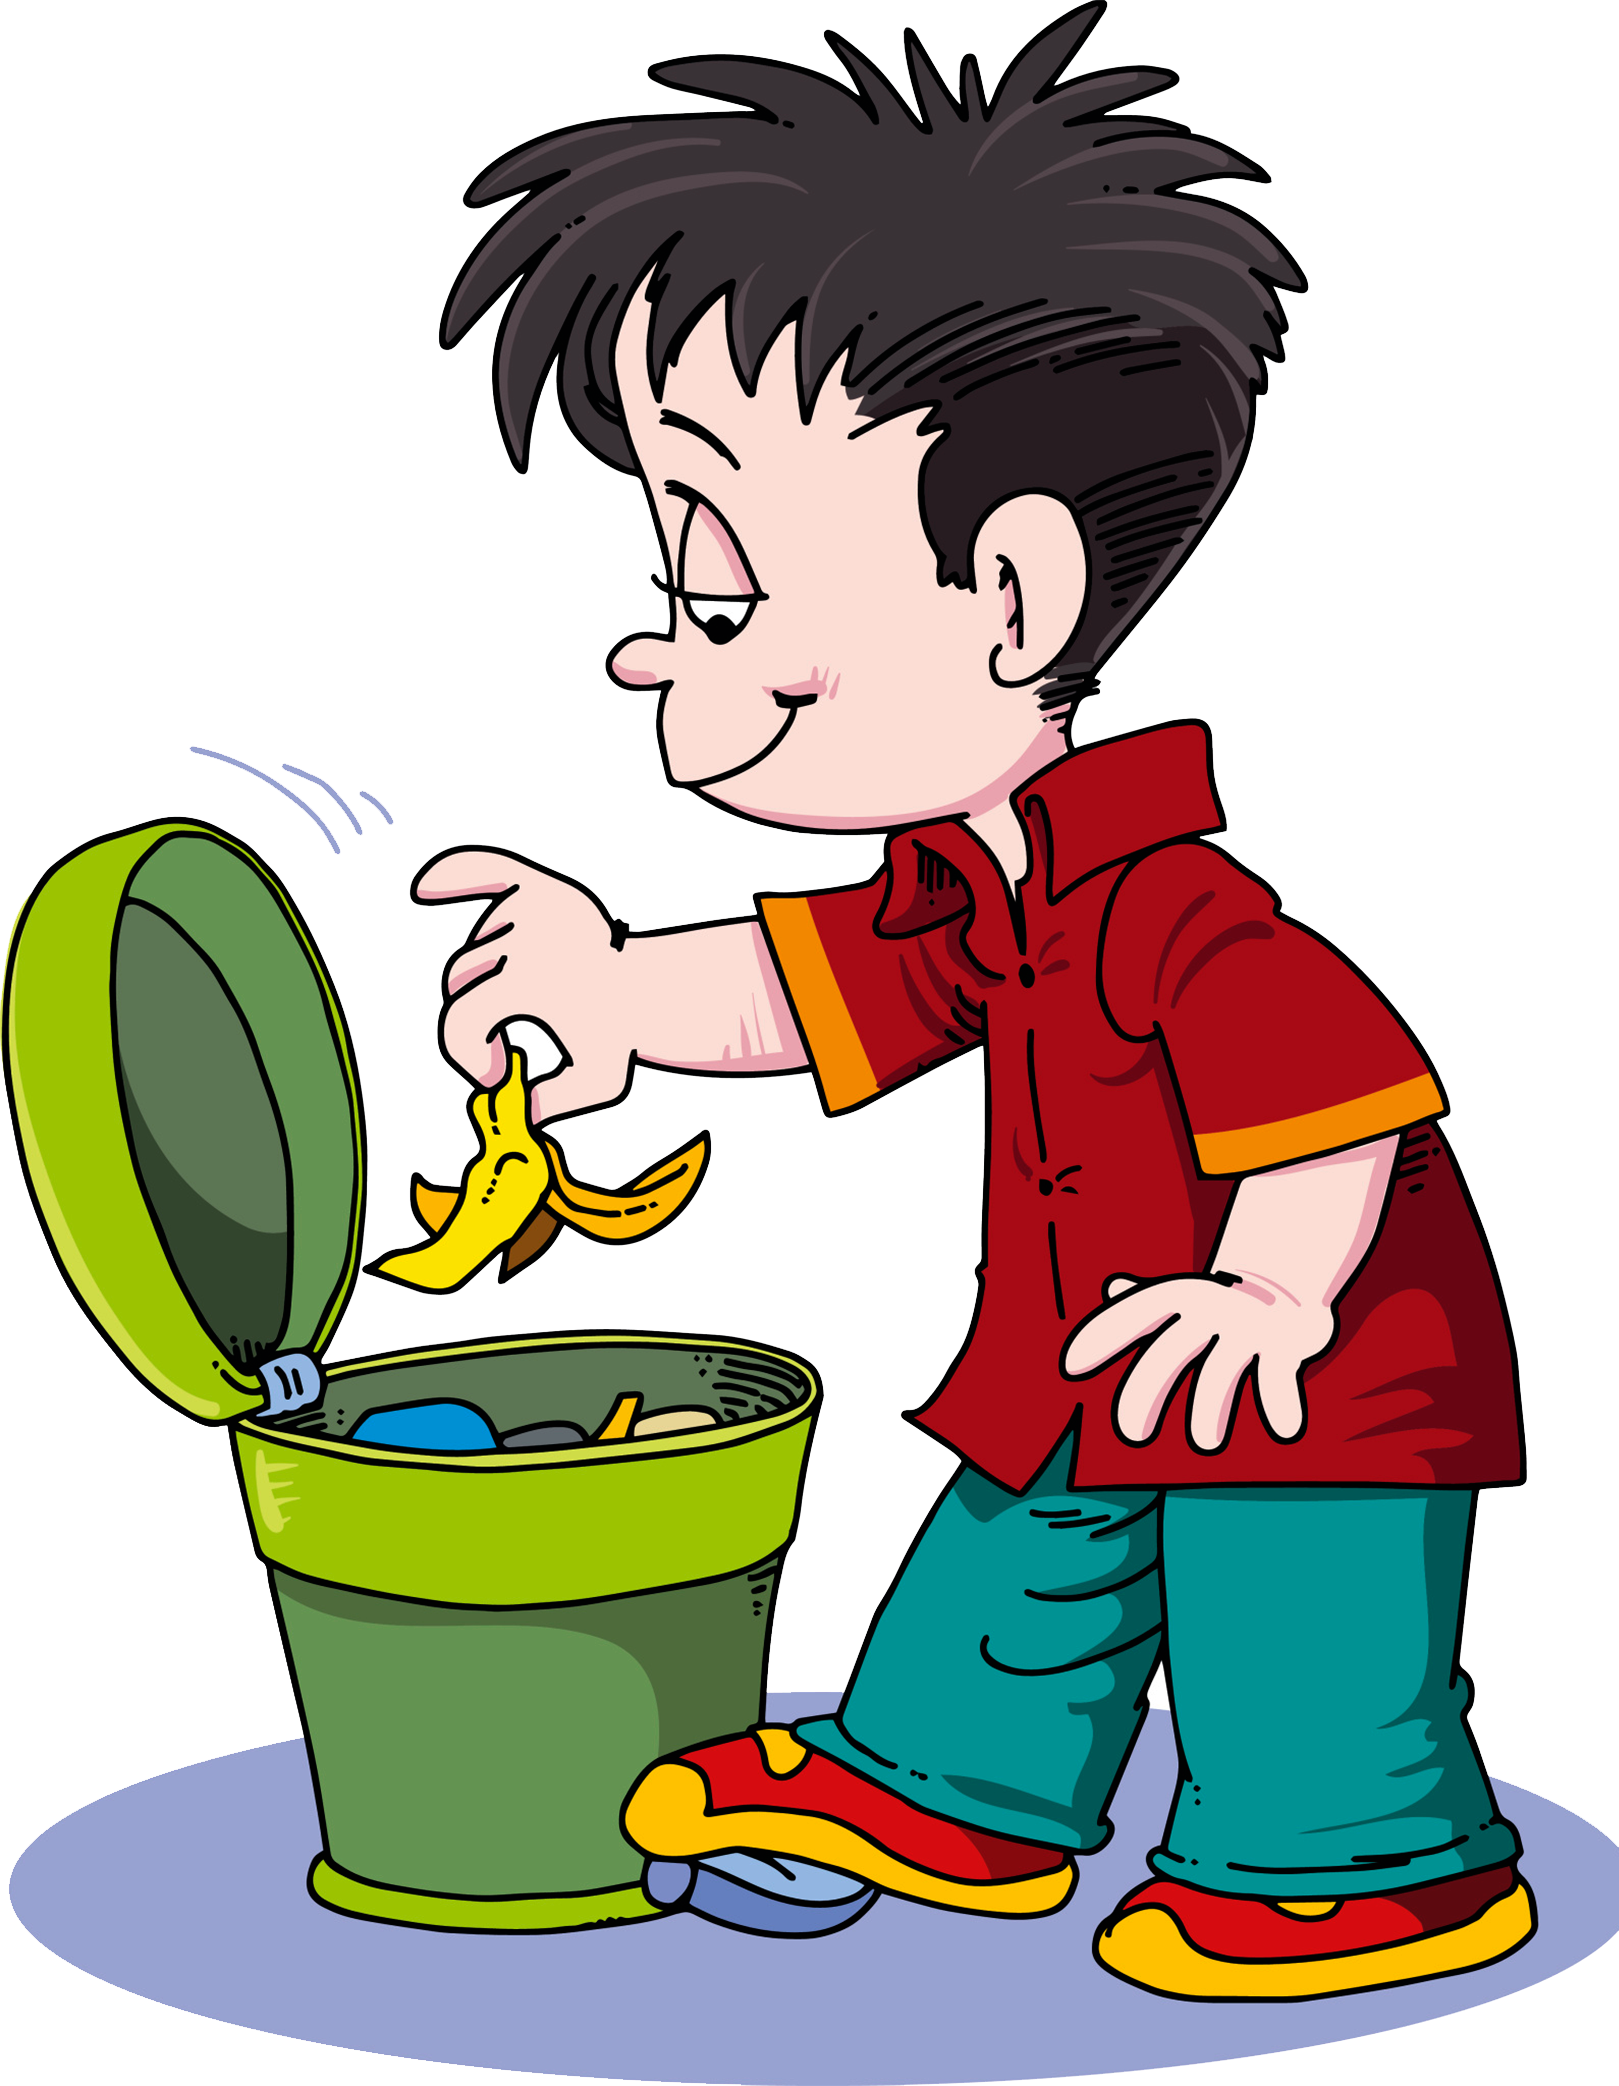 Waste container clip art. Clipart food rubbish